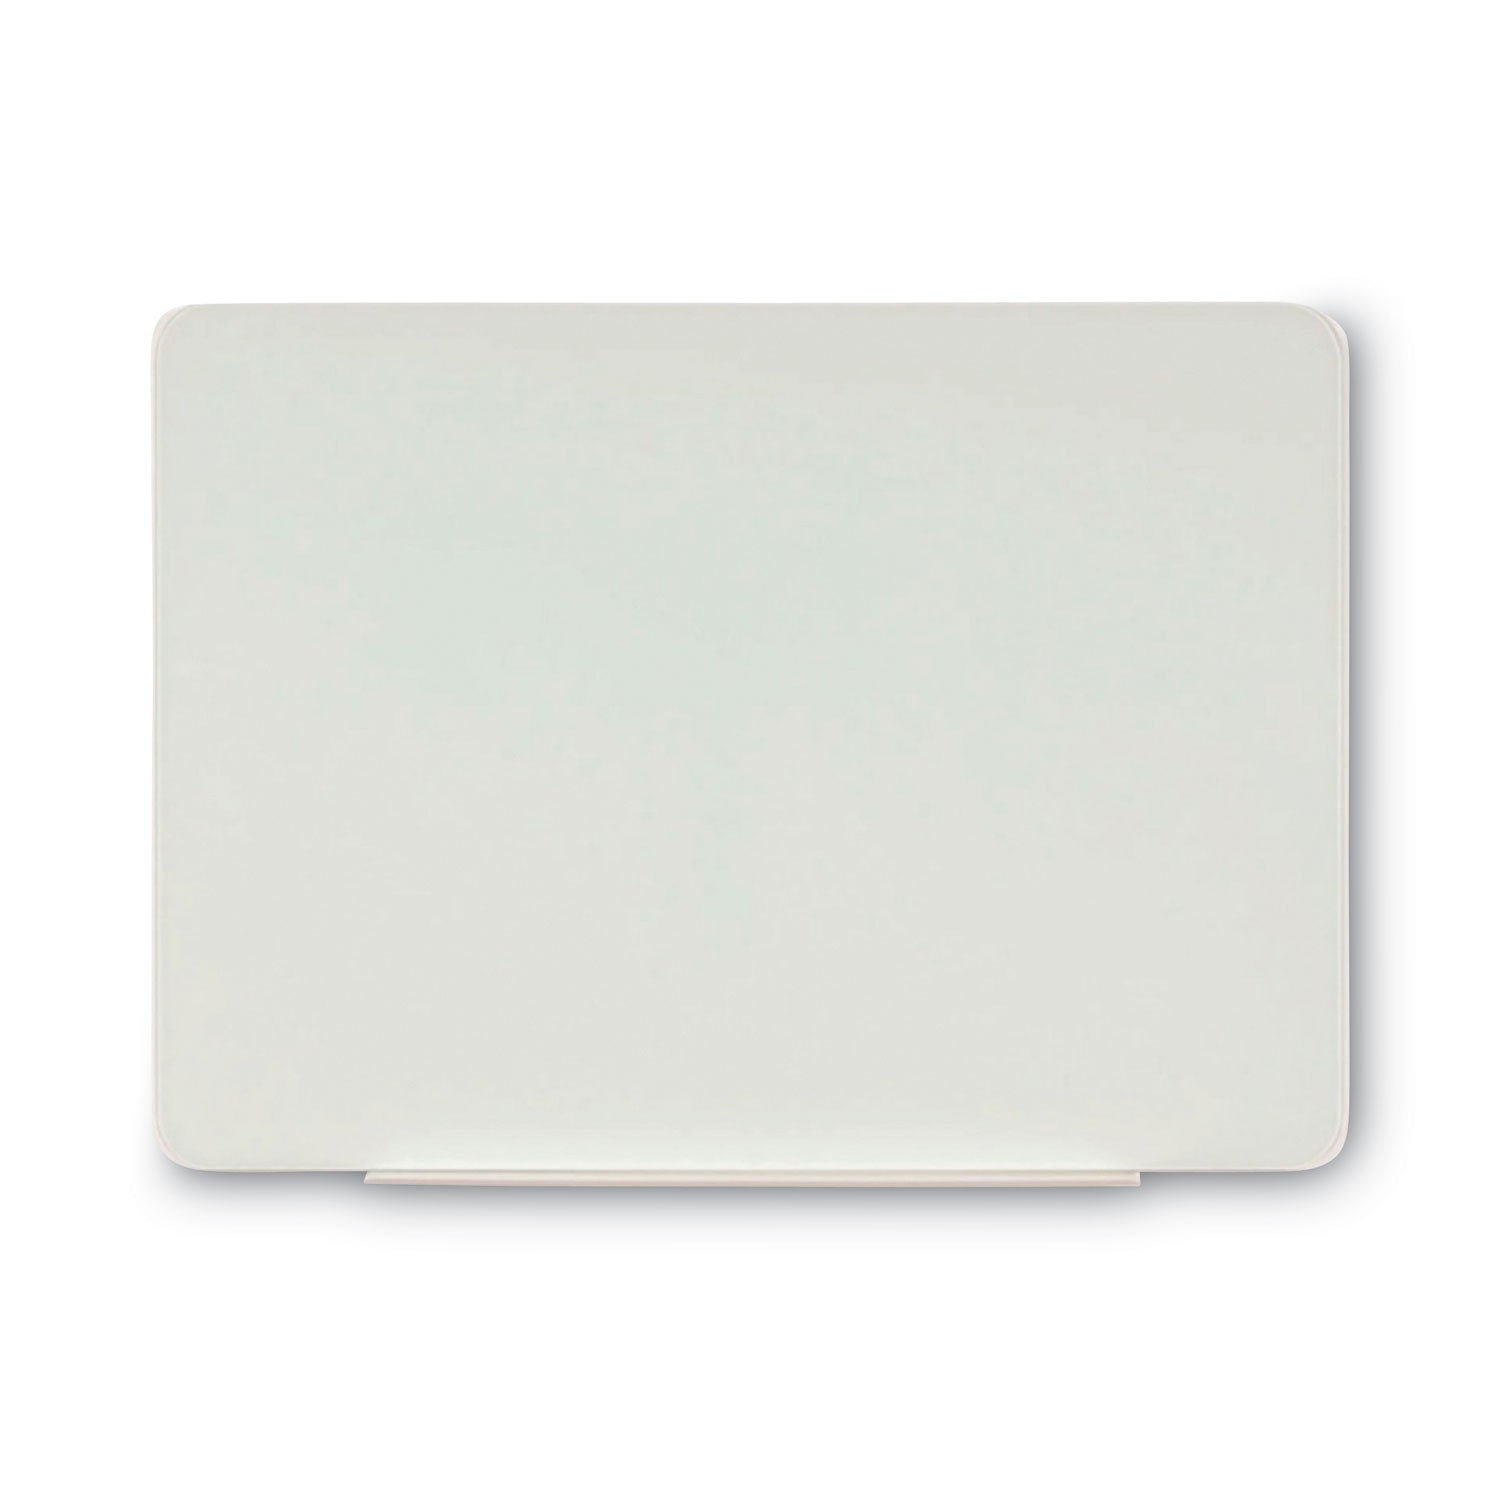 magnetic-glass-dry-erase-board-48-x-36-opaque-white-surface_bvcgl080101 - 1